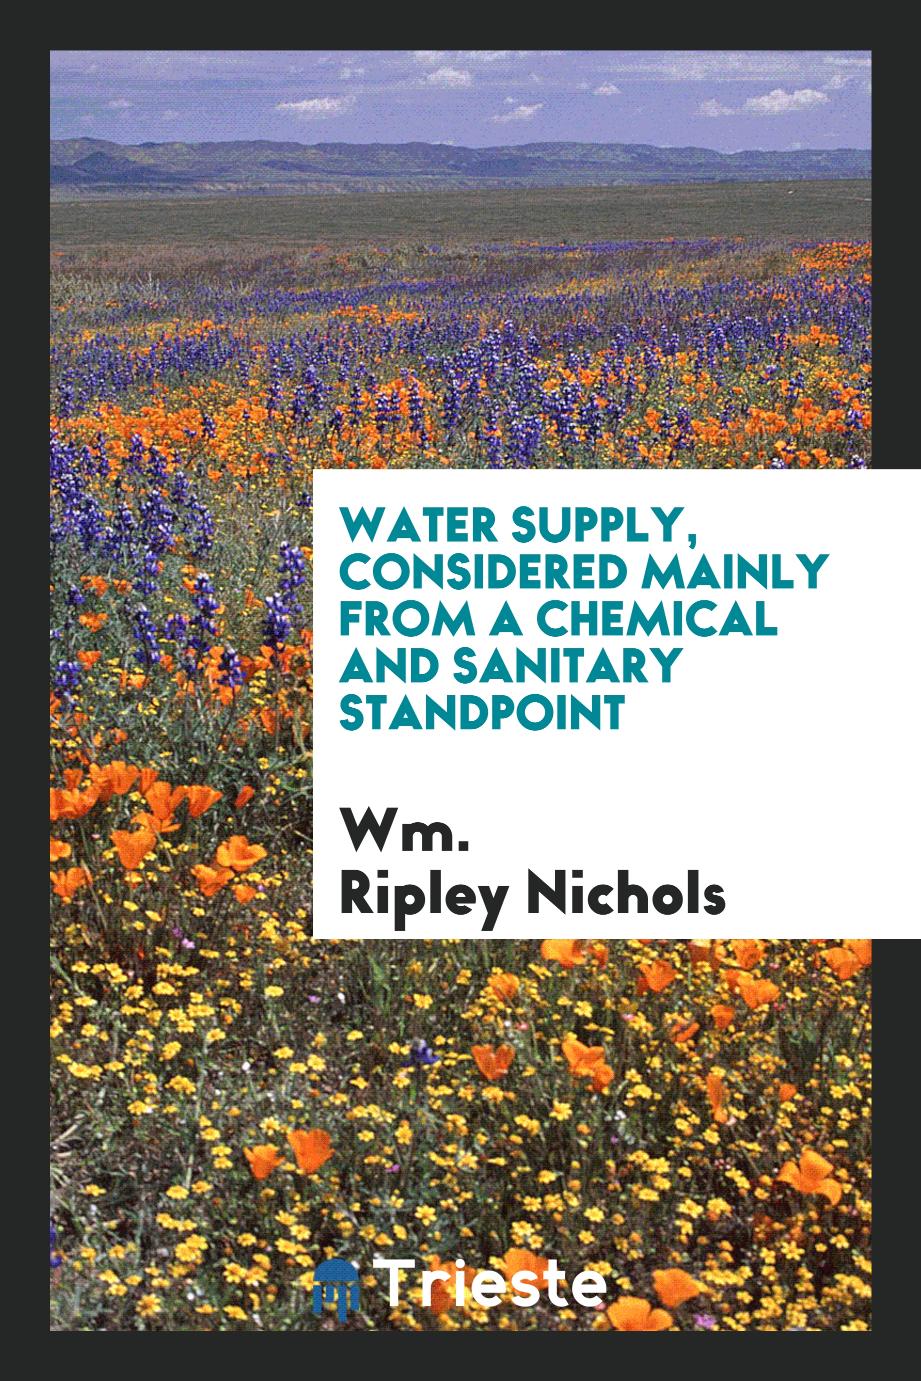 Water supply, considered mainly from a chemical and sanitary standpoint